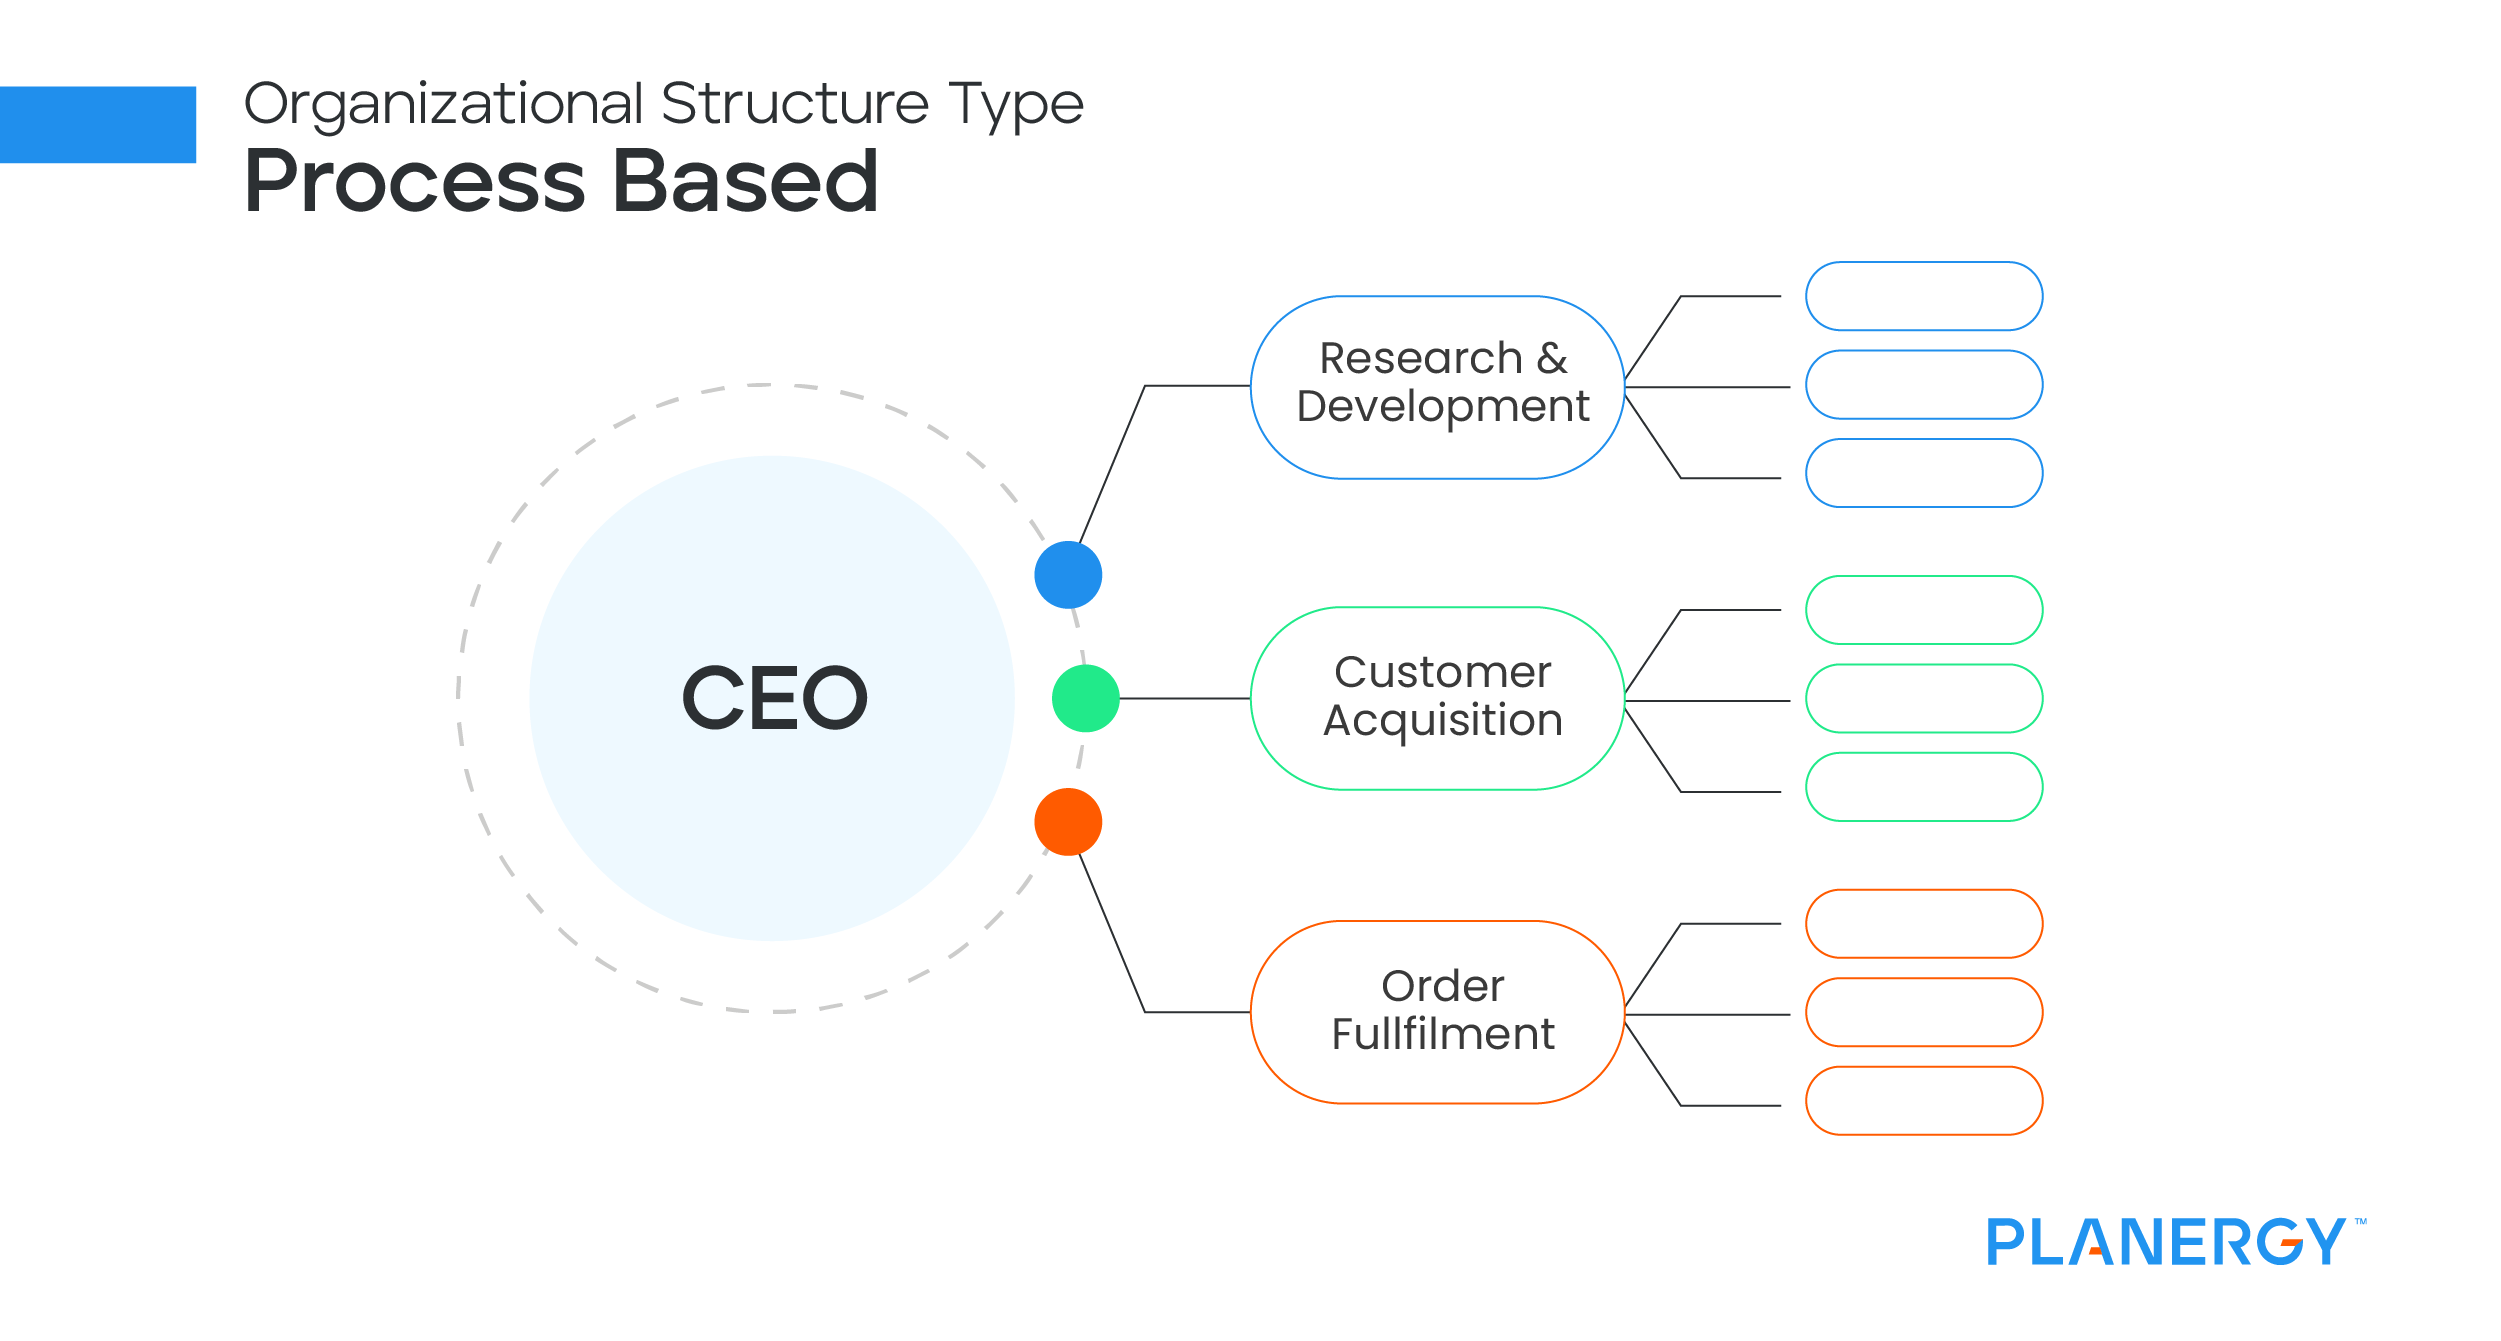 Process based organizational structure